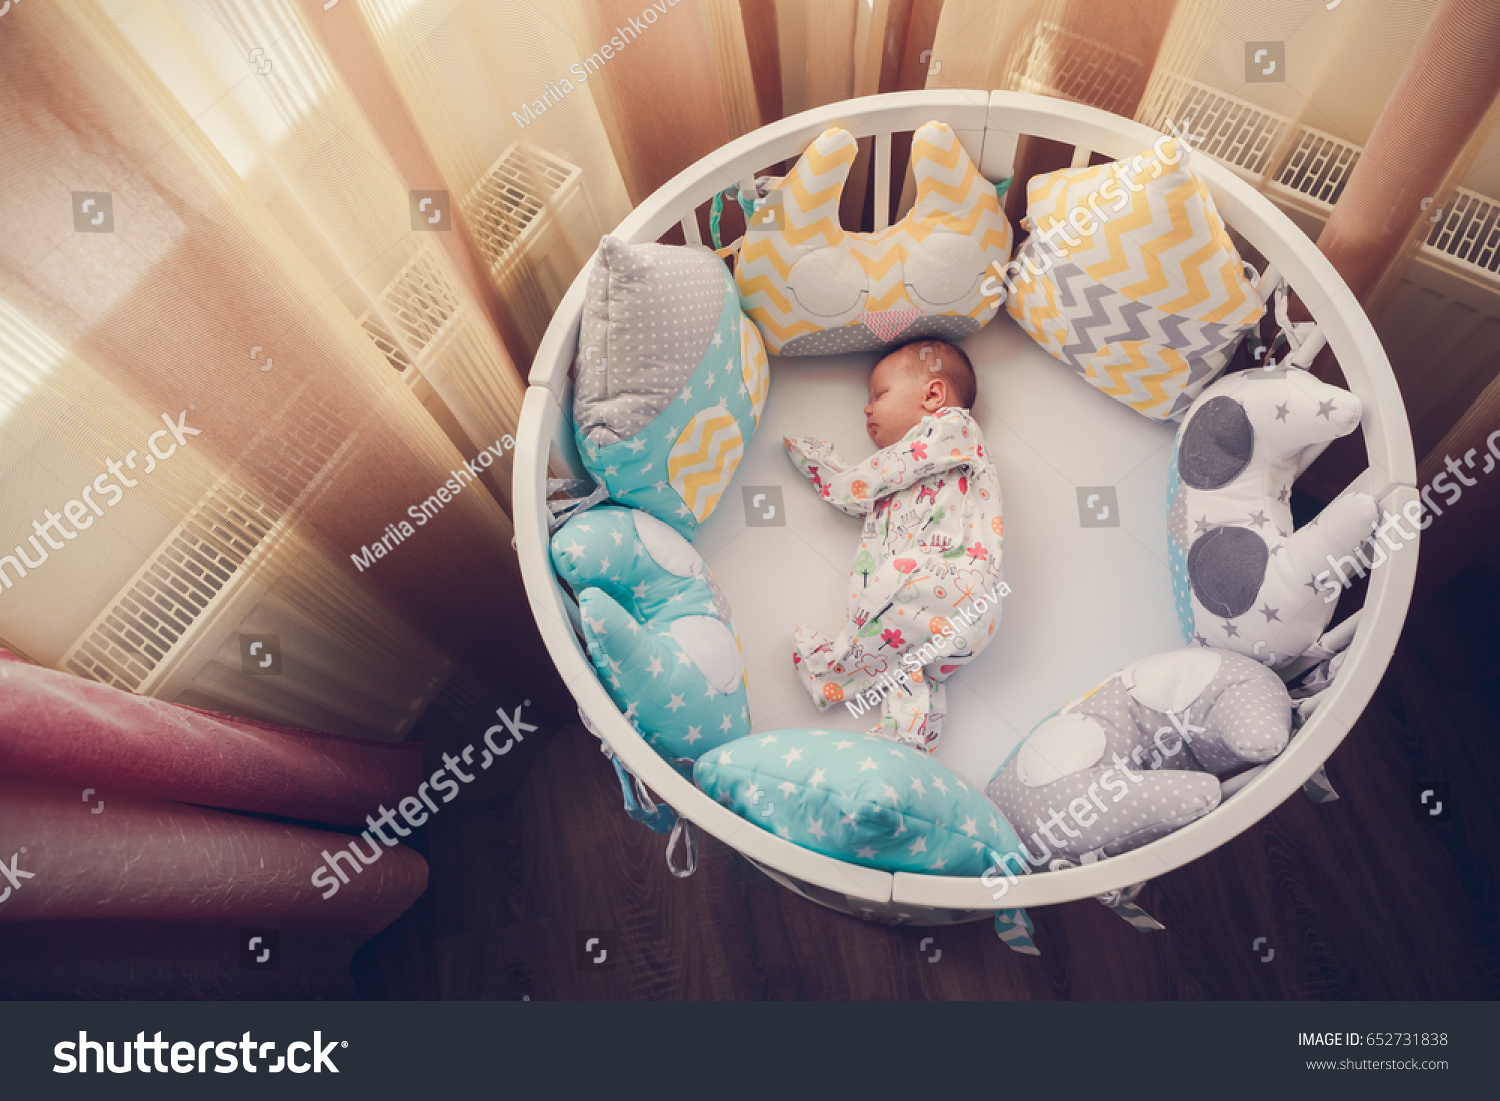 round cribs for baby girl